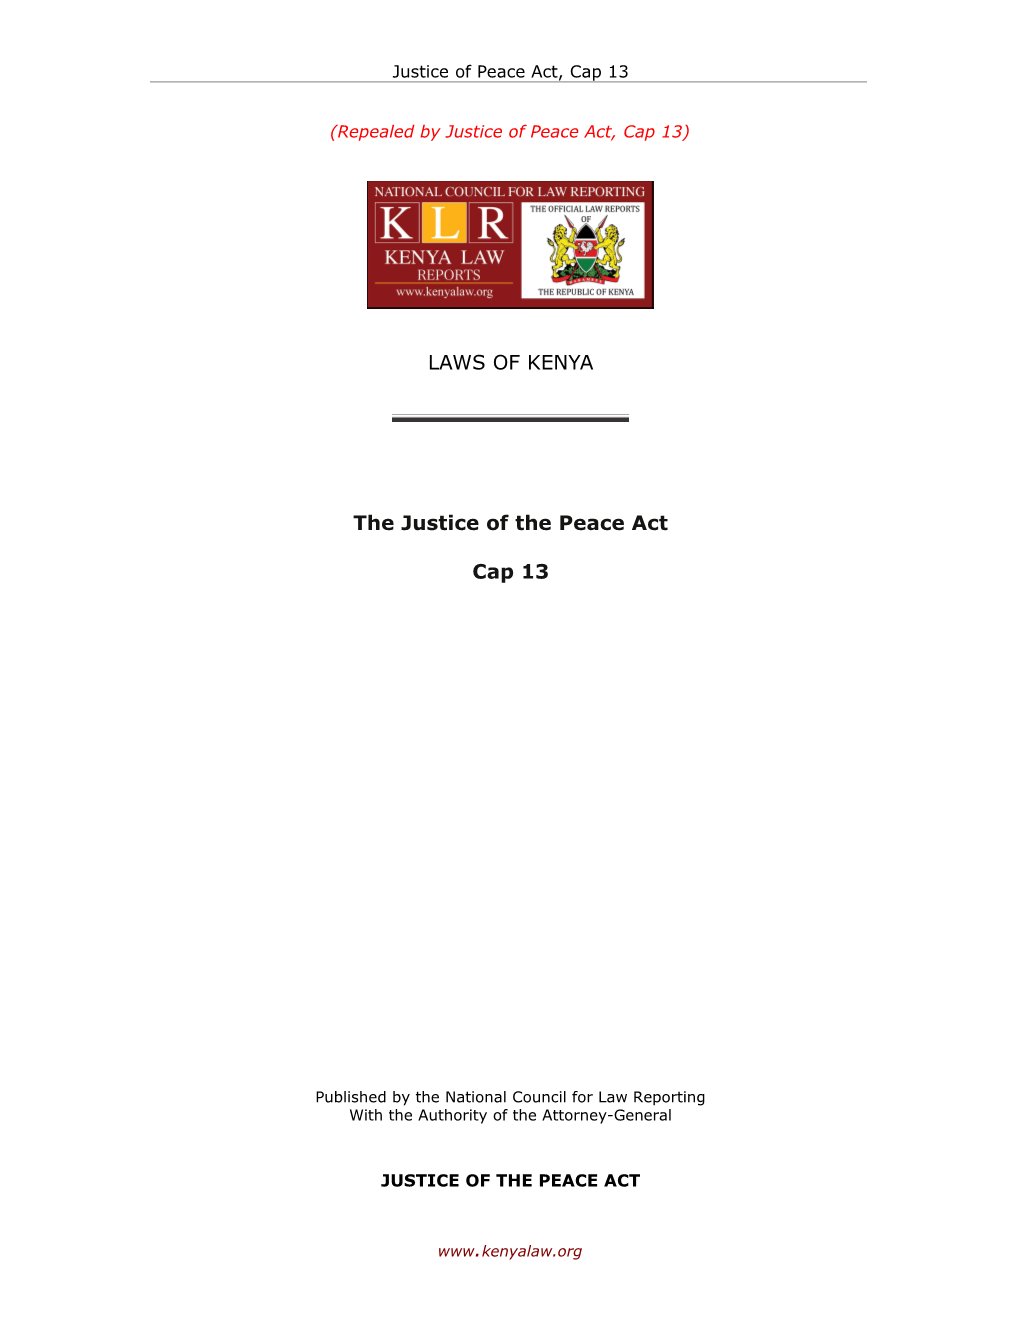 CHAPTER 13 - Justice of the Peace (Repealed) Act